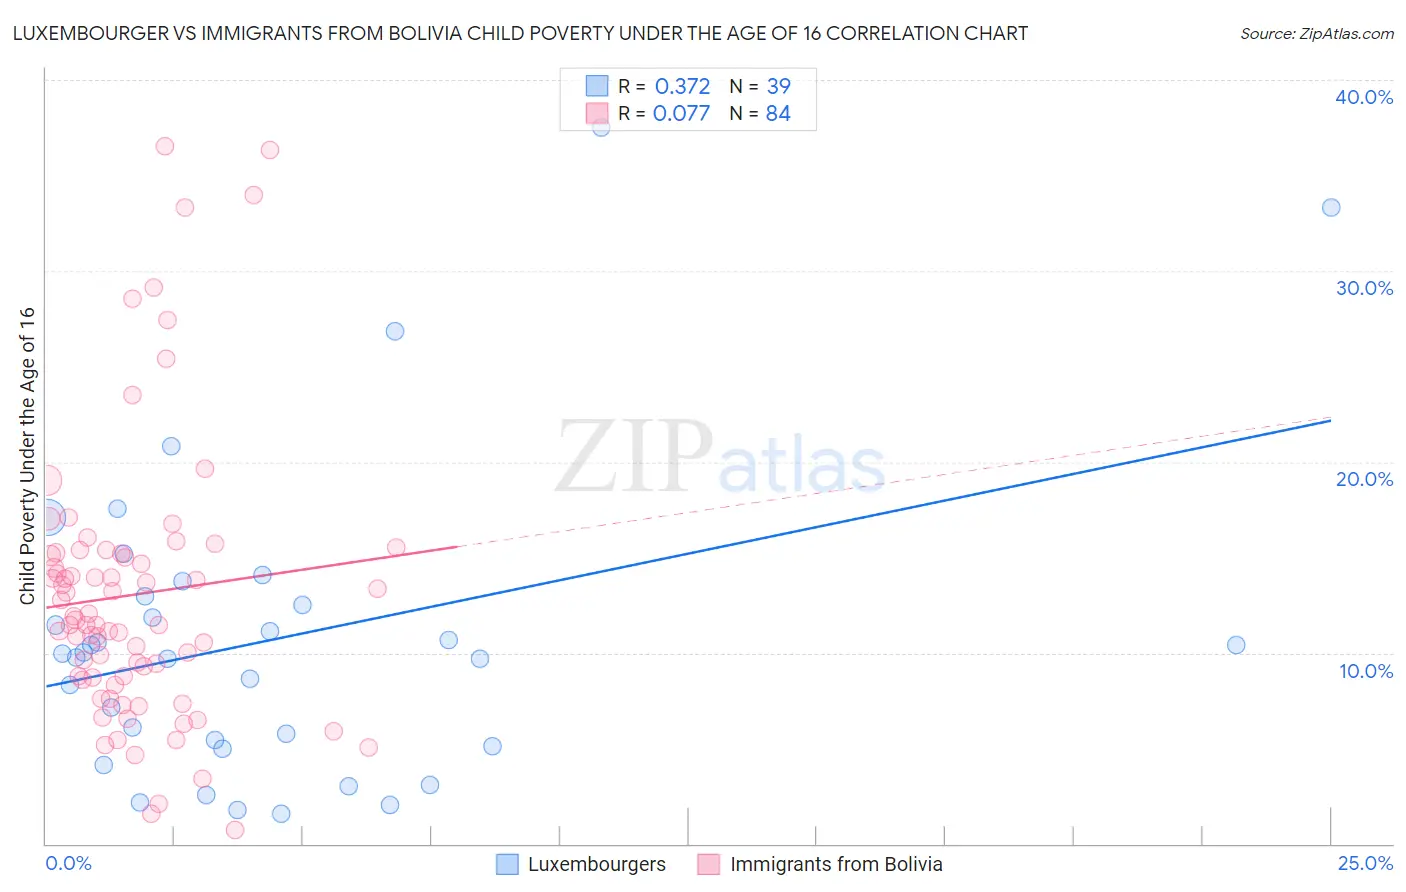 Luxembourger vs Immigrants from Bolivia Child Poverty Under the Age of 16